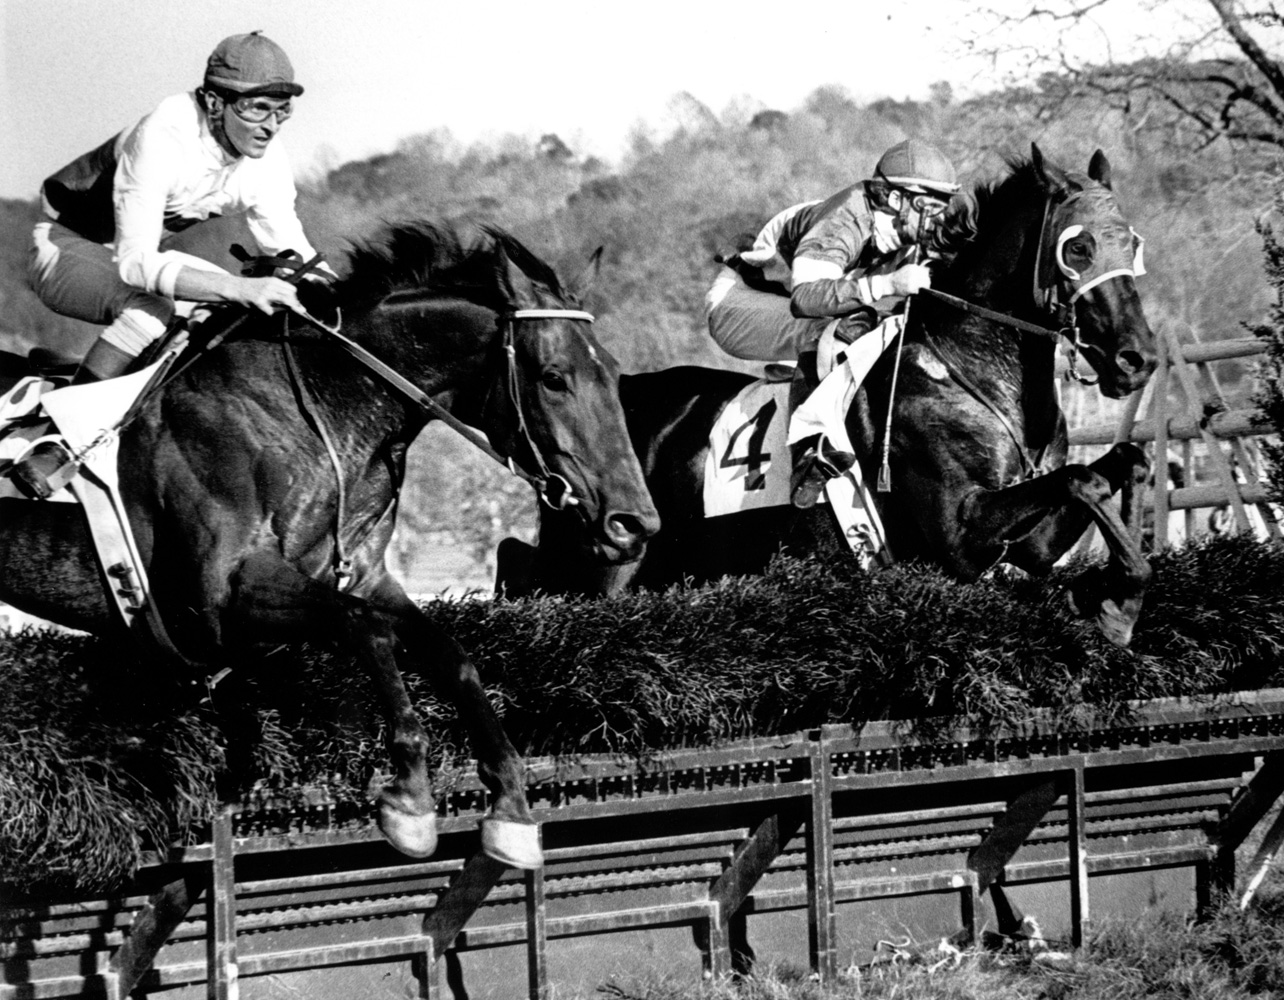 Jerry Fishback and Café Prince (left) taking a jump in the 1977 Samuel Martin Memorial Essex Hunt at Far Hills (Douglas Lees/Museum Collection)